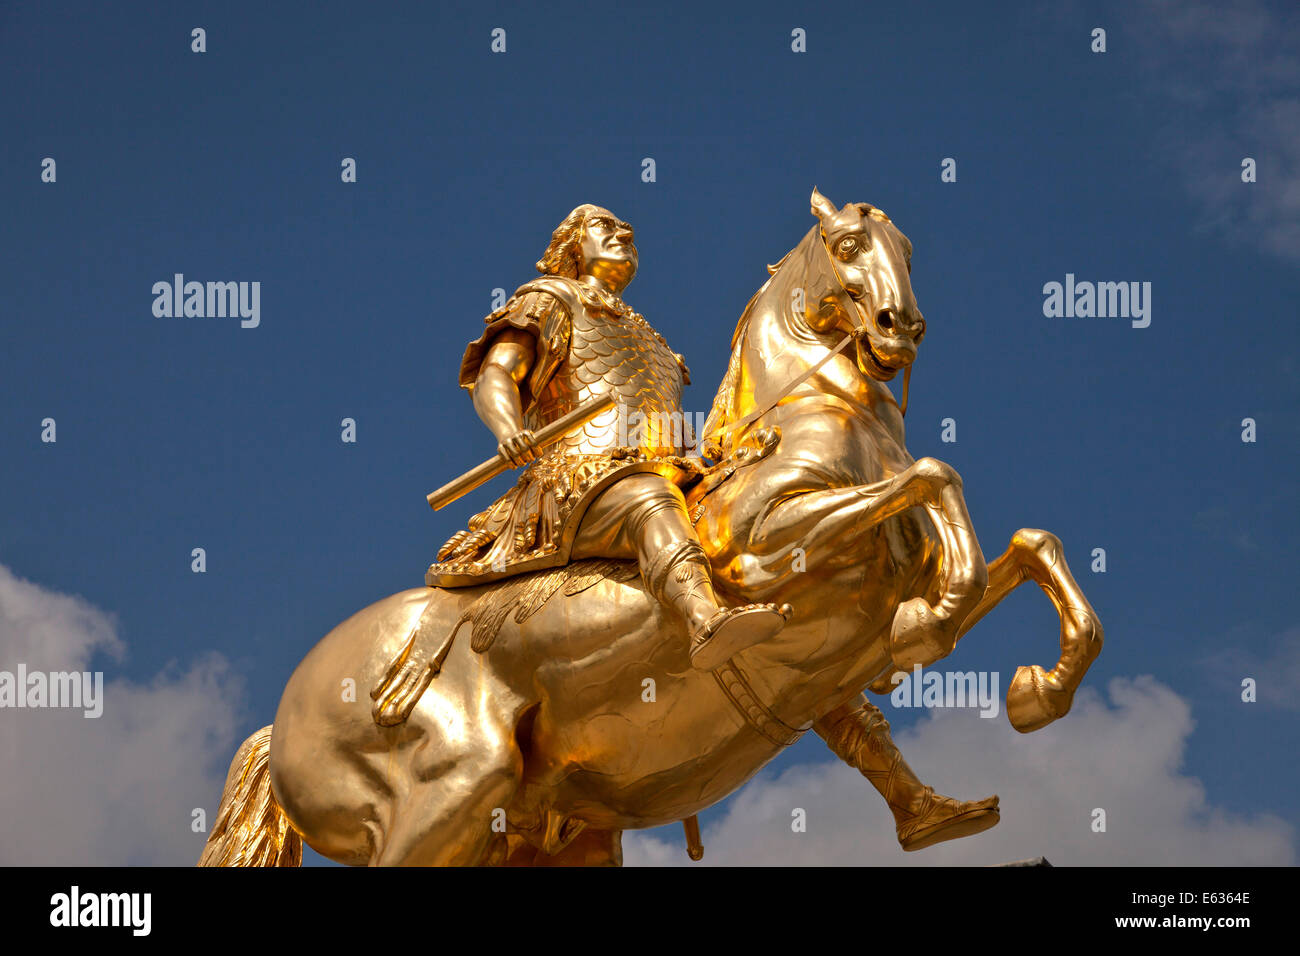 The Goldener Reiter or Golden Rider, a gilded equestrian statue of Augustus the strong,  in Dresden, Saxony, Germany, Europe Stock Photo